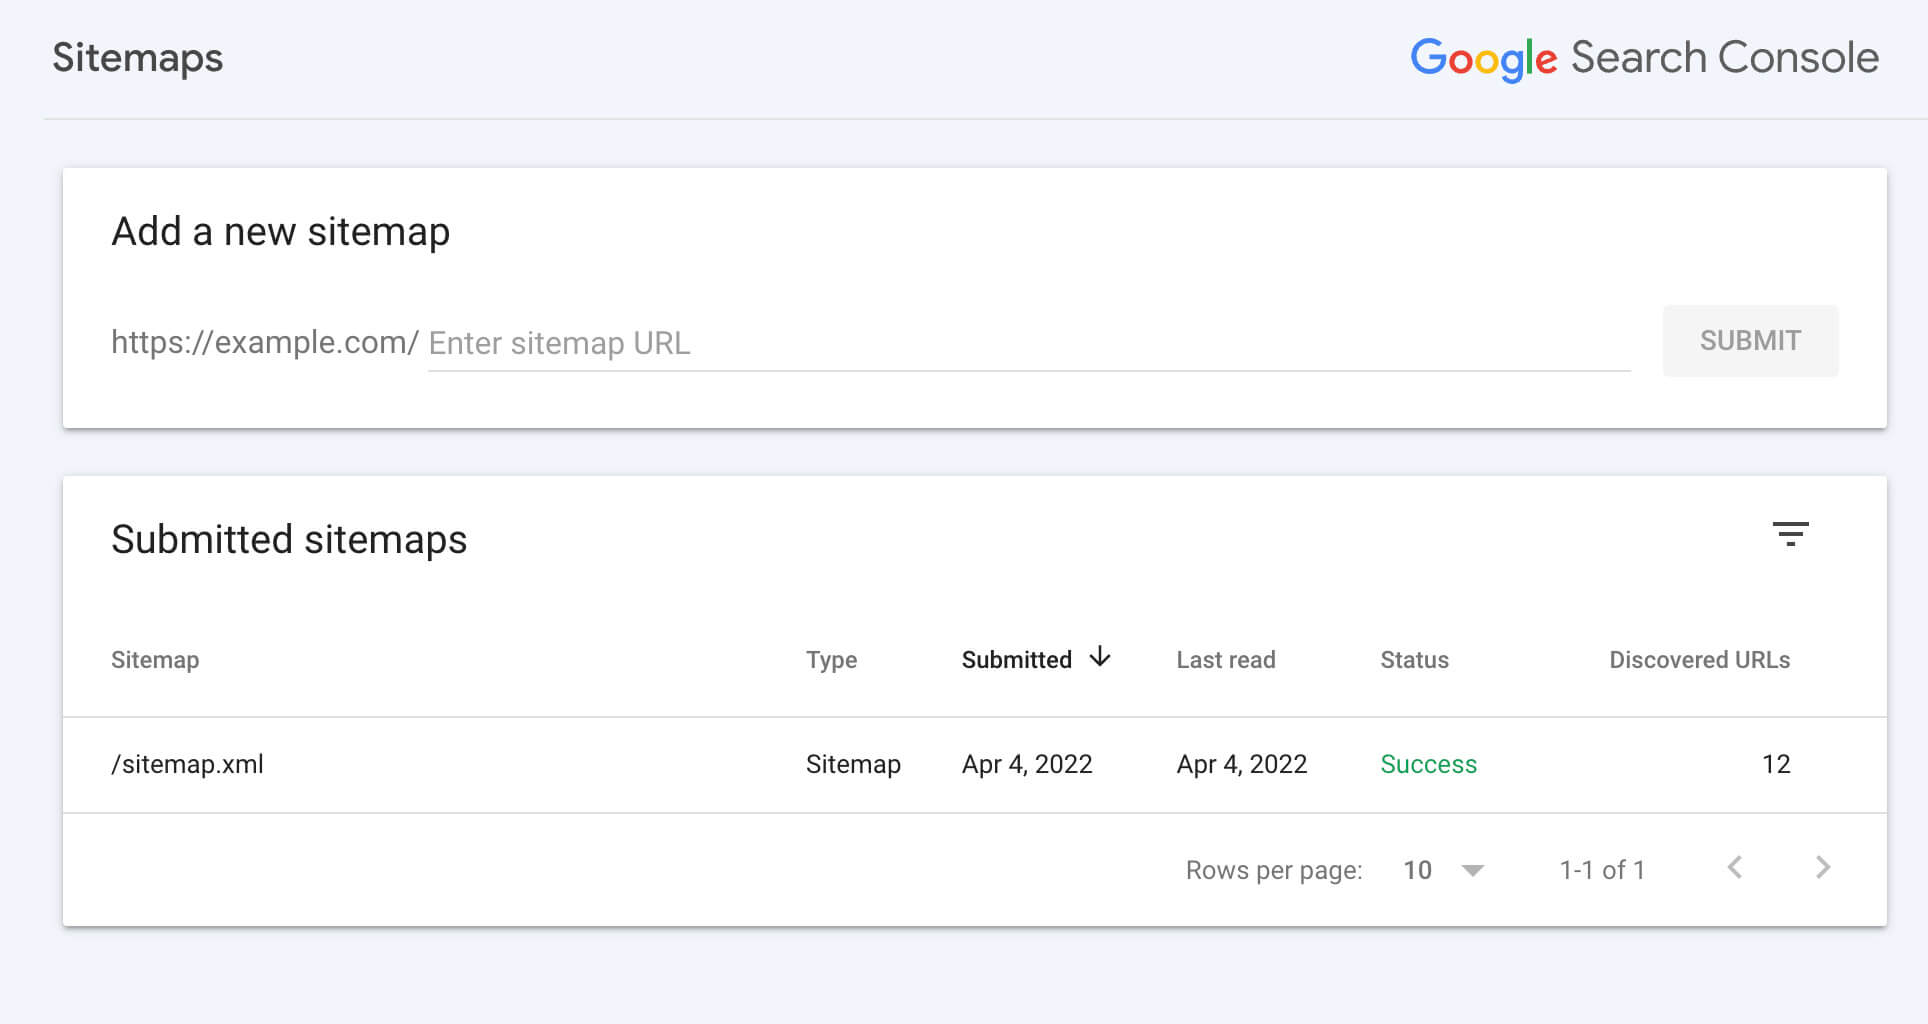 Use Google Search Console to submit a new website, or recently changed website, directly to Google for indexing.